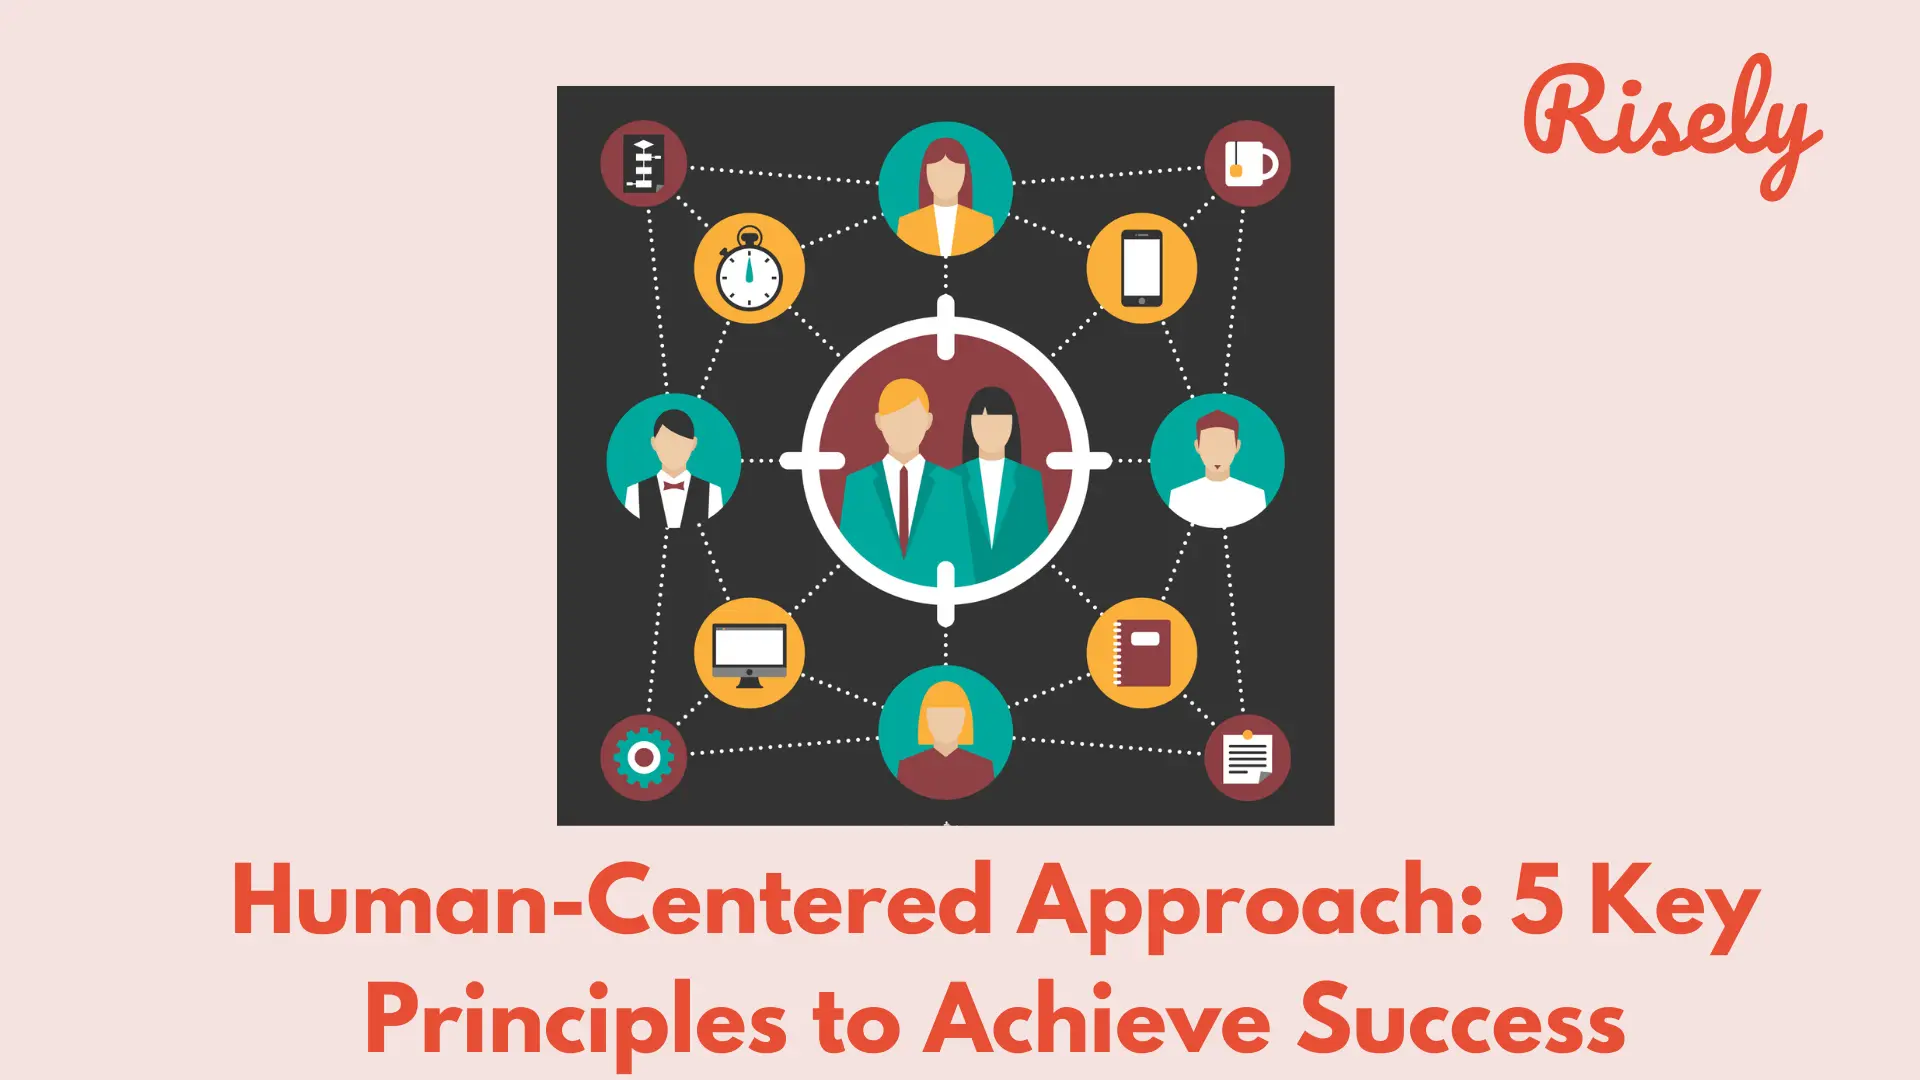 Human-Centered Approach: 5 Key Principles to Achieve Success